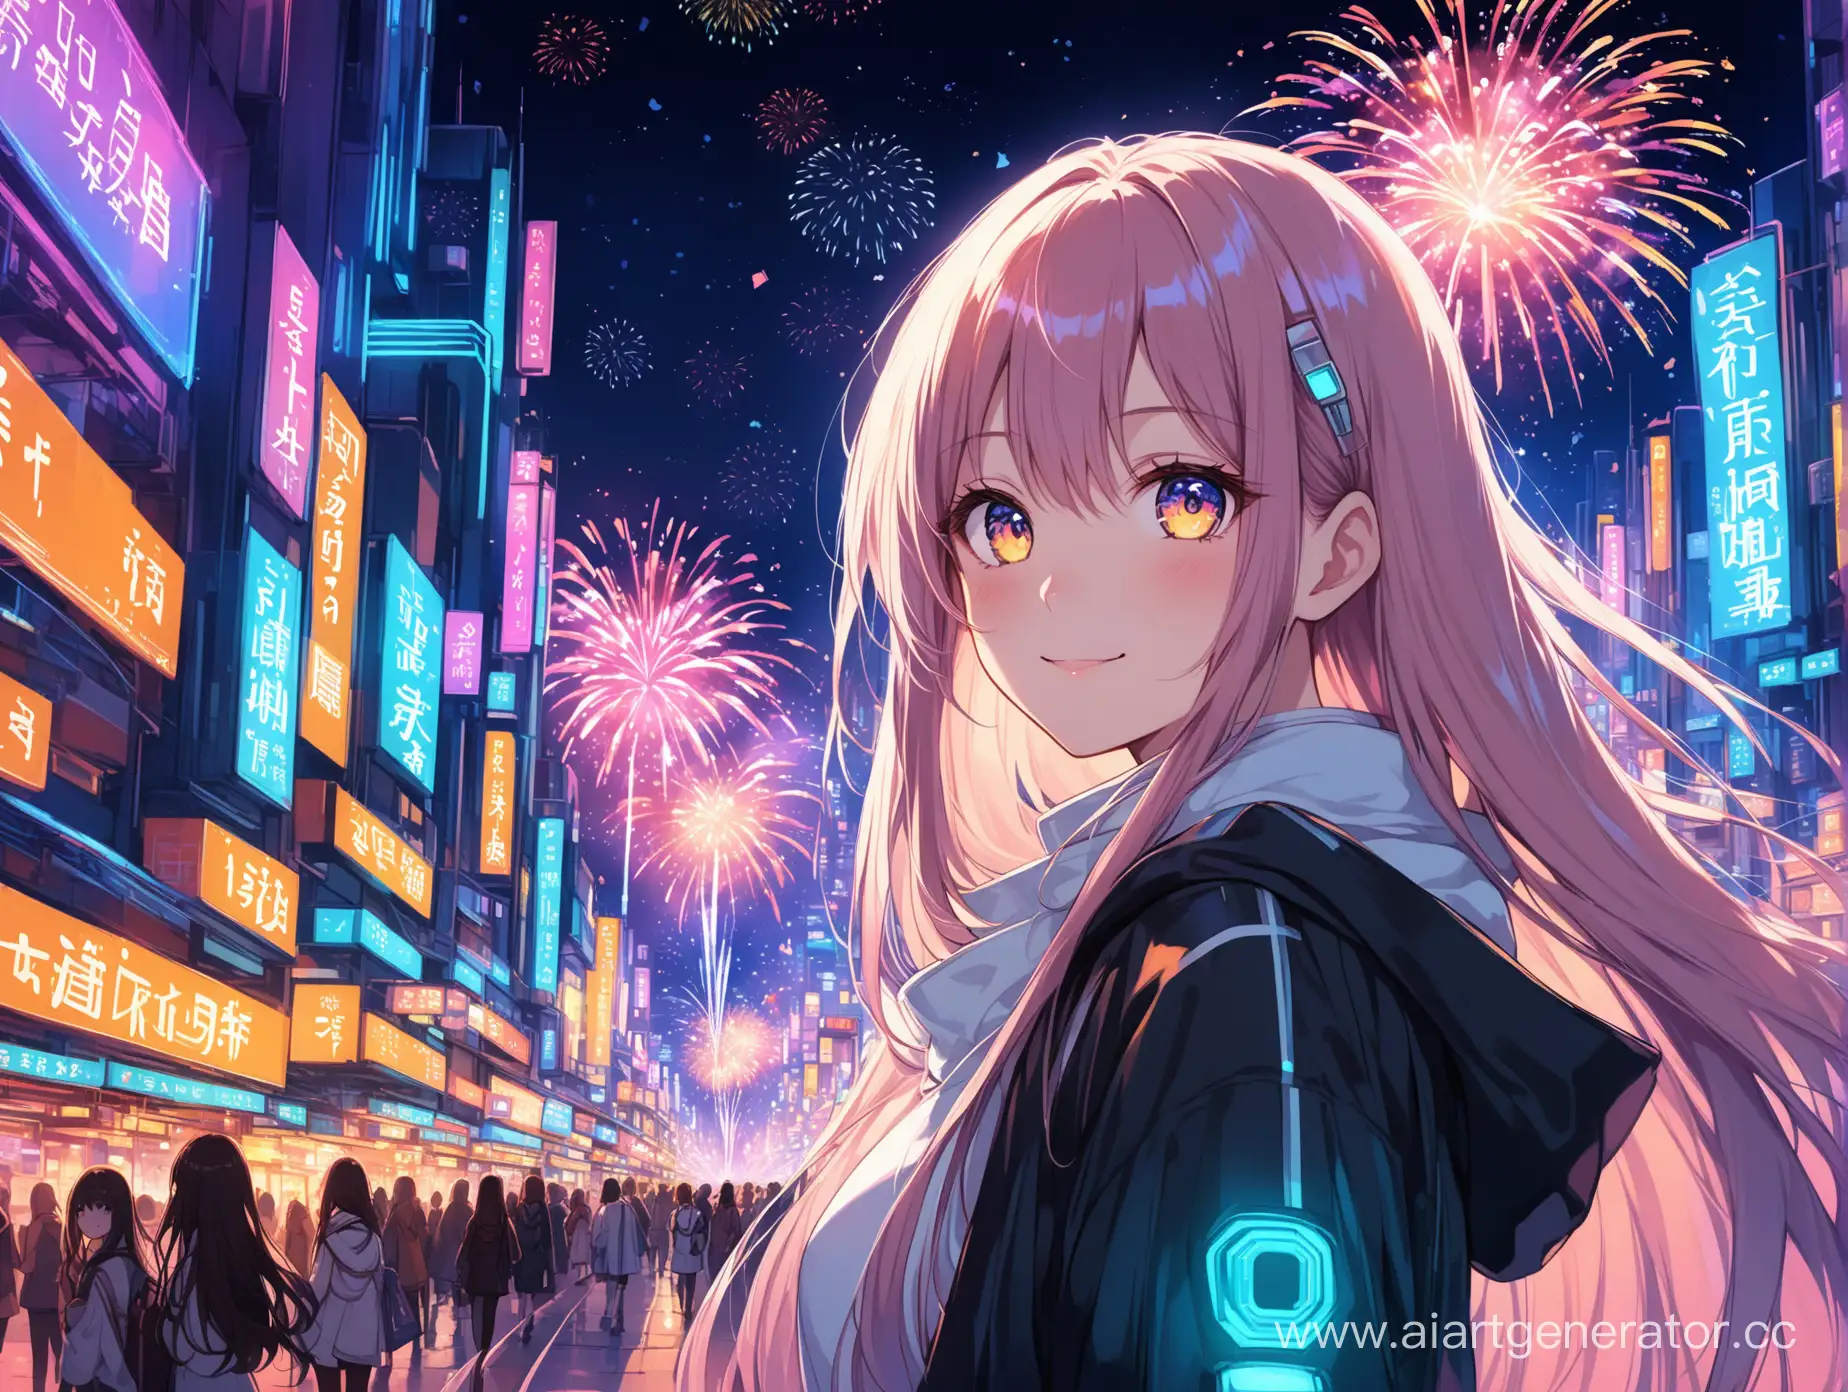 Anime-Girl-Smiling-in-Futuristic-Neon-City-with-Fireworks